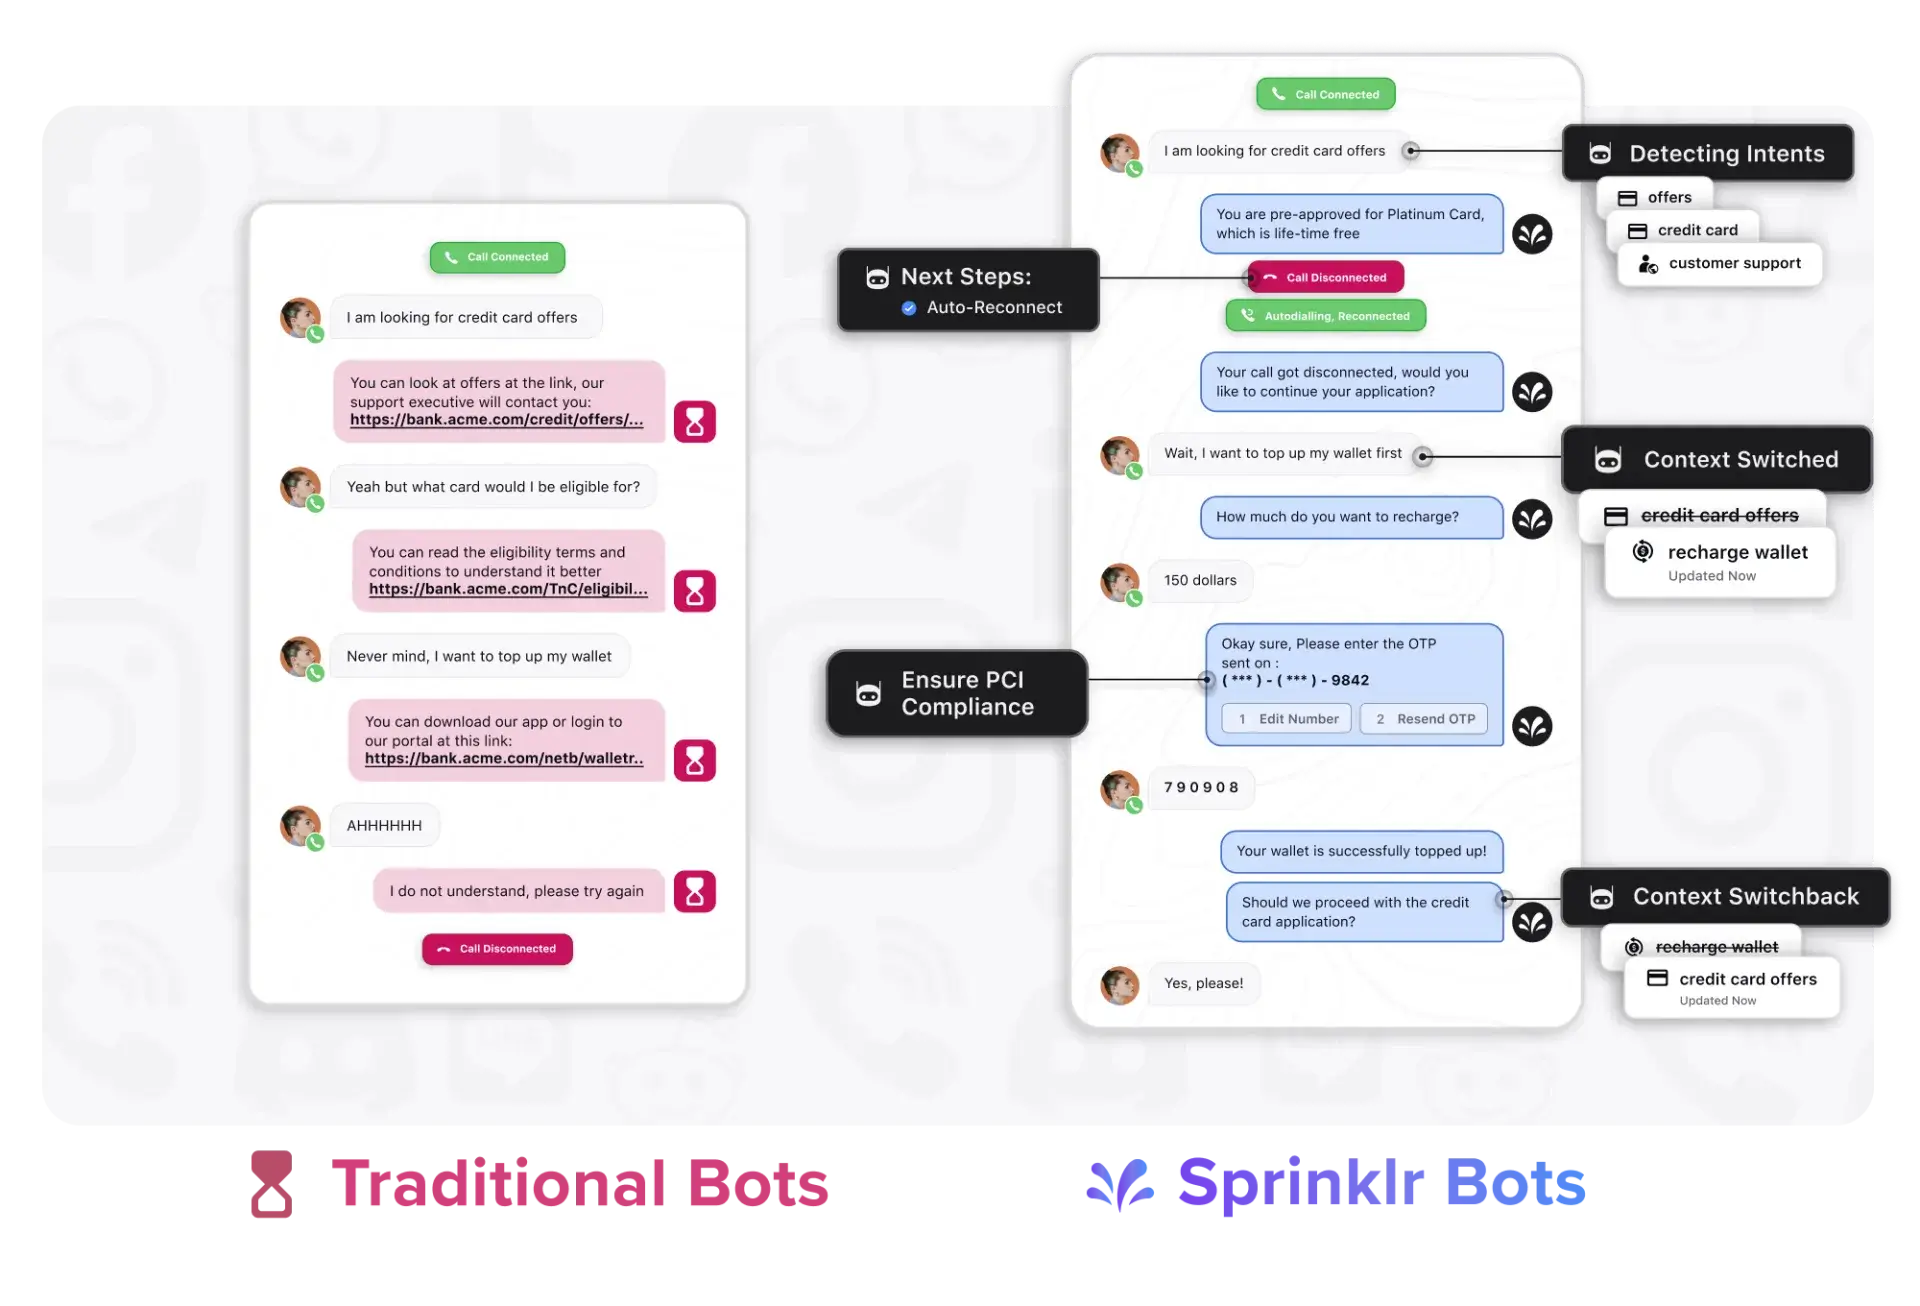 Sprinklr's AI chatbots handles intent and context change in real time